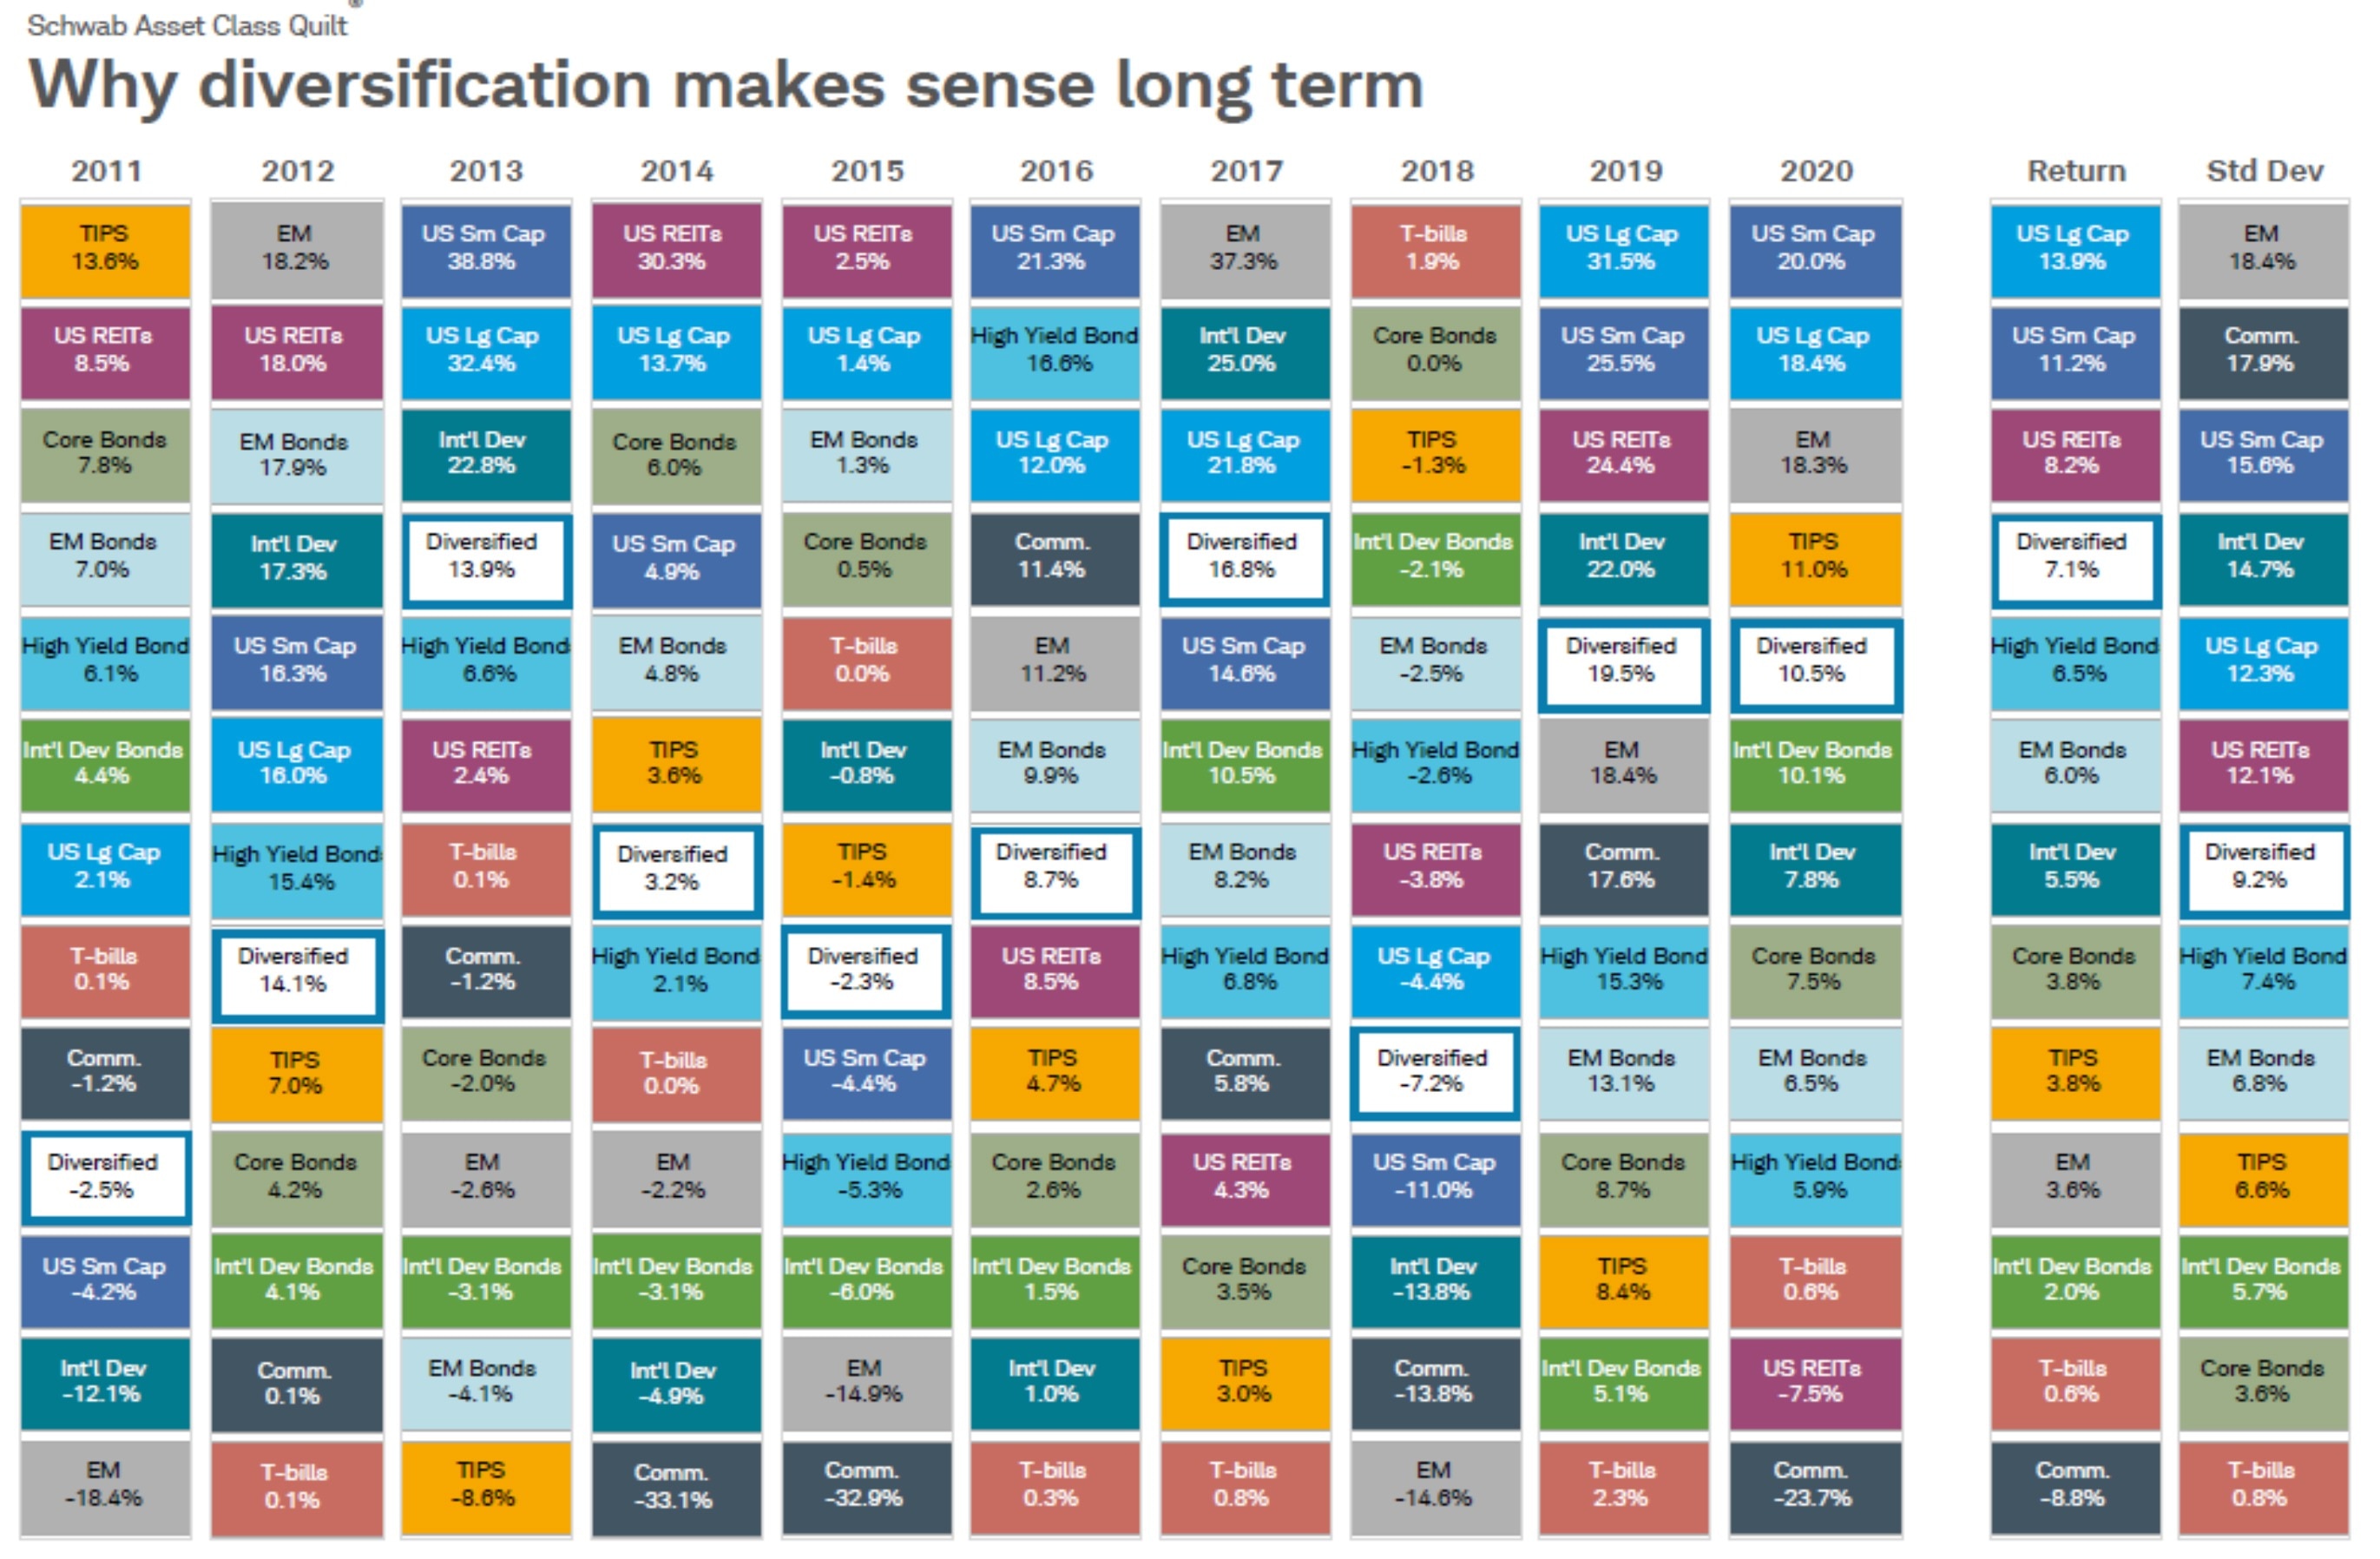 Colorful quilt chart showing why diversification makes long-term sense. The chart shows that it’s nearly impossible to predict which asset classes will perform best in any given year.   